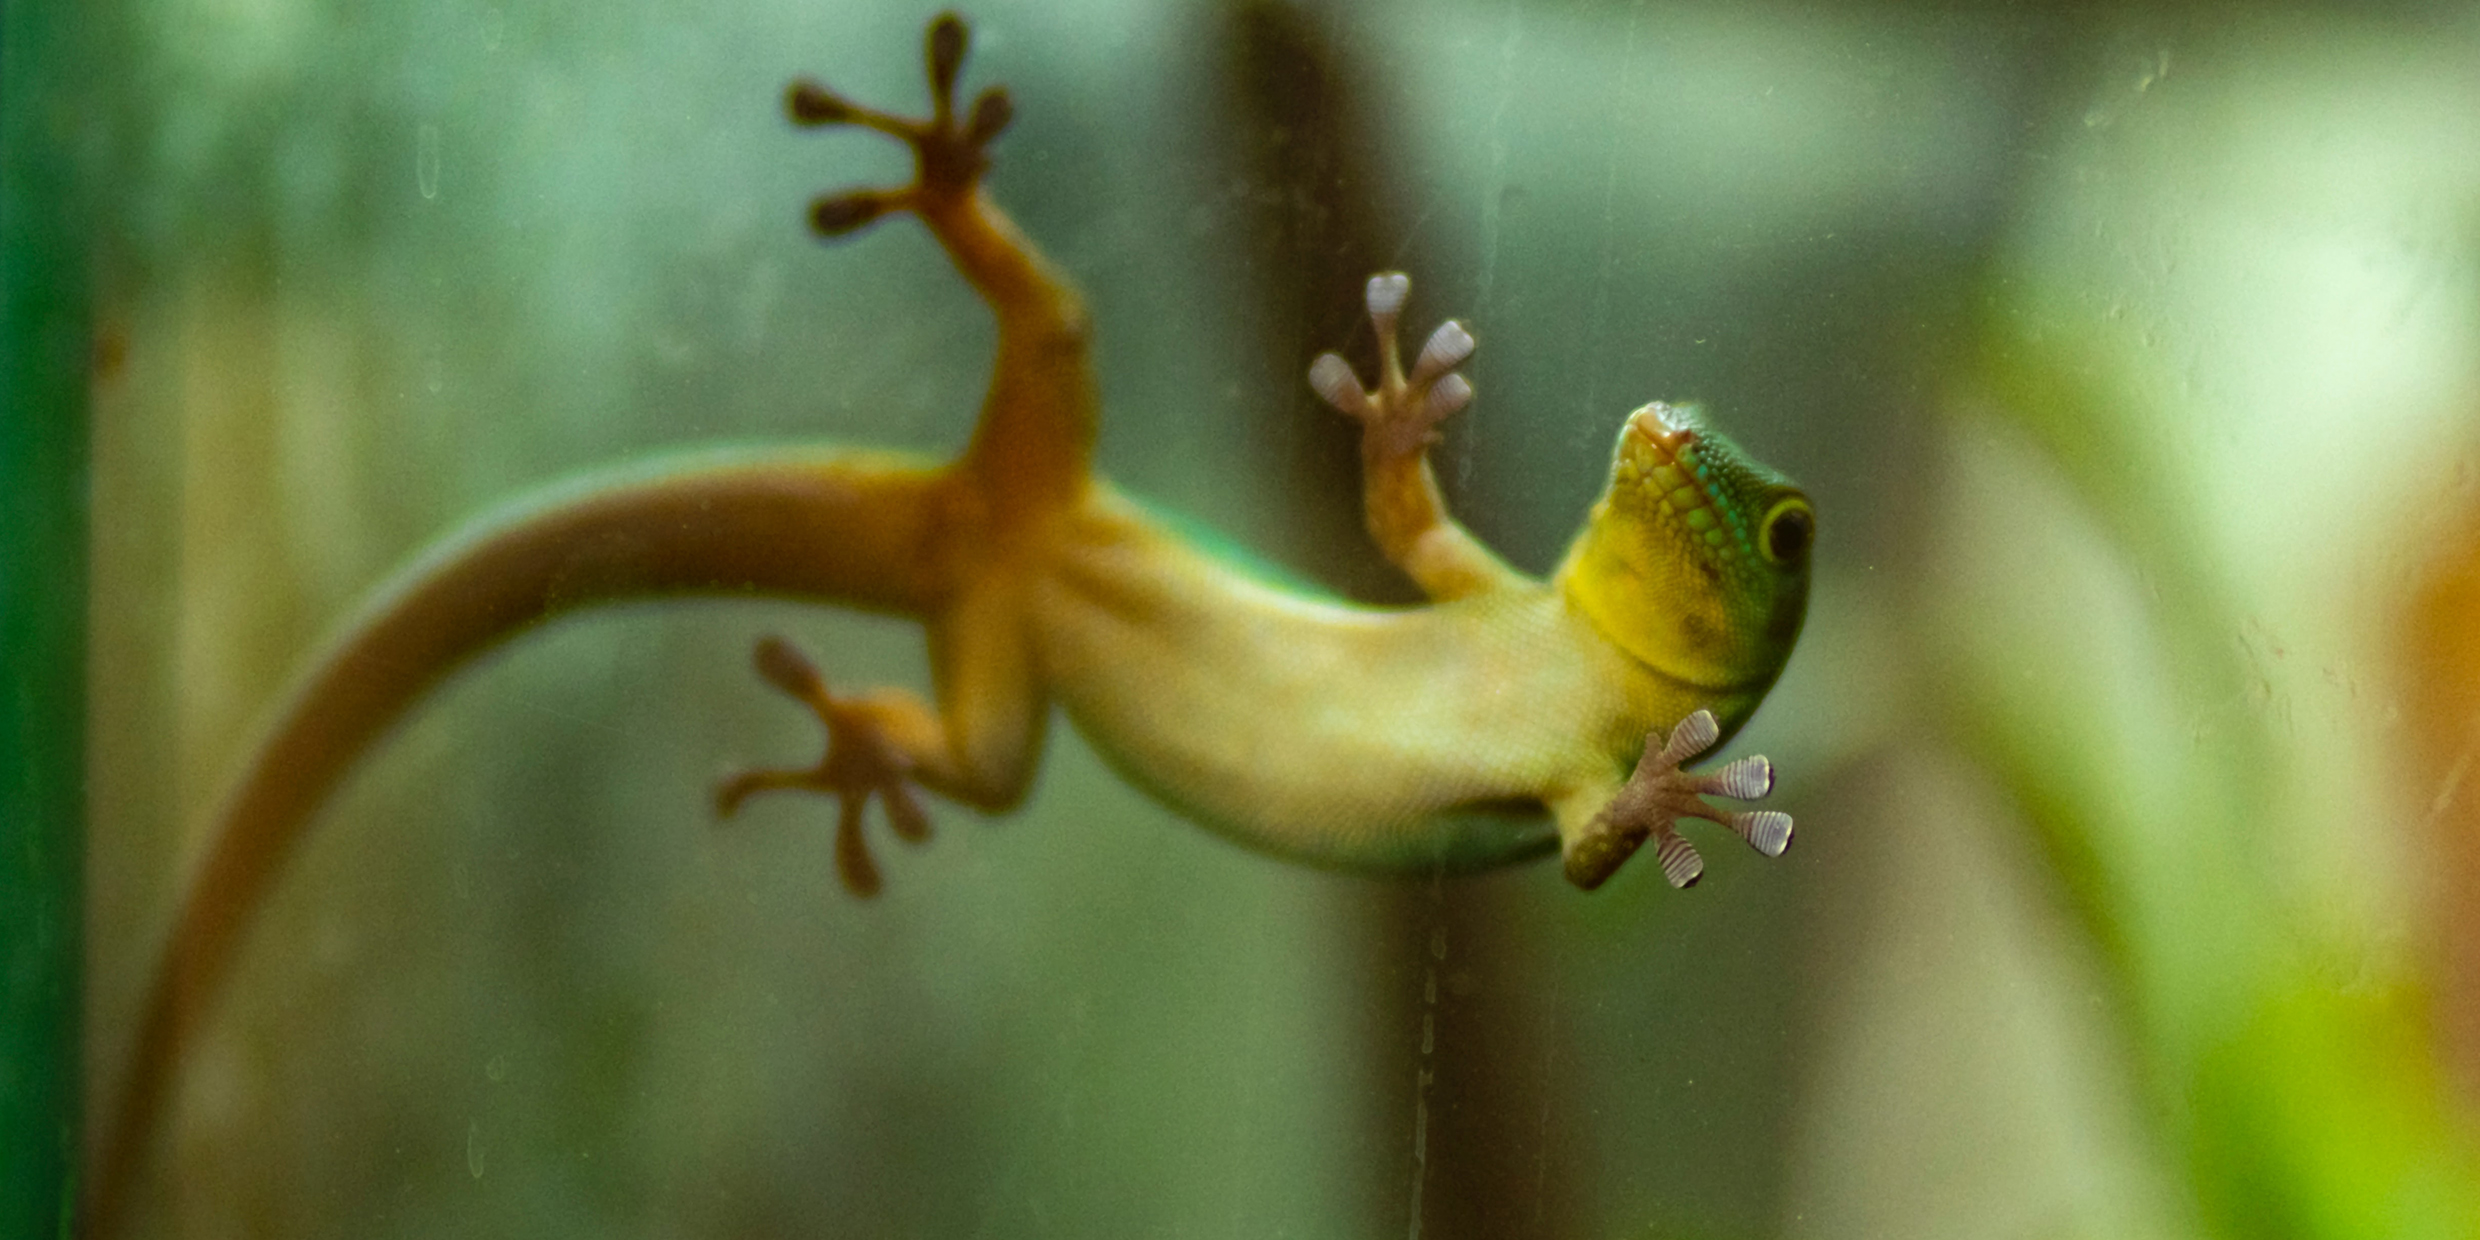 Image of a gecko climbing on a pane of glass